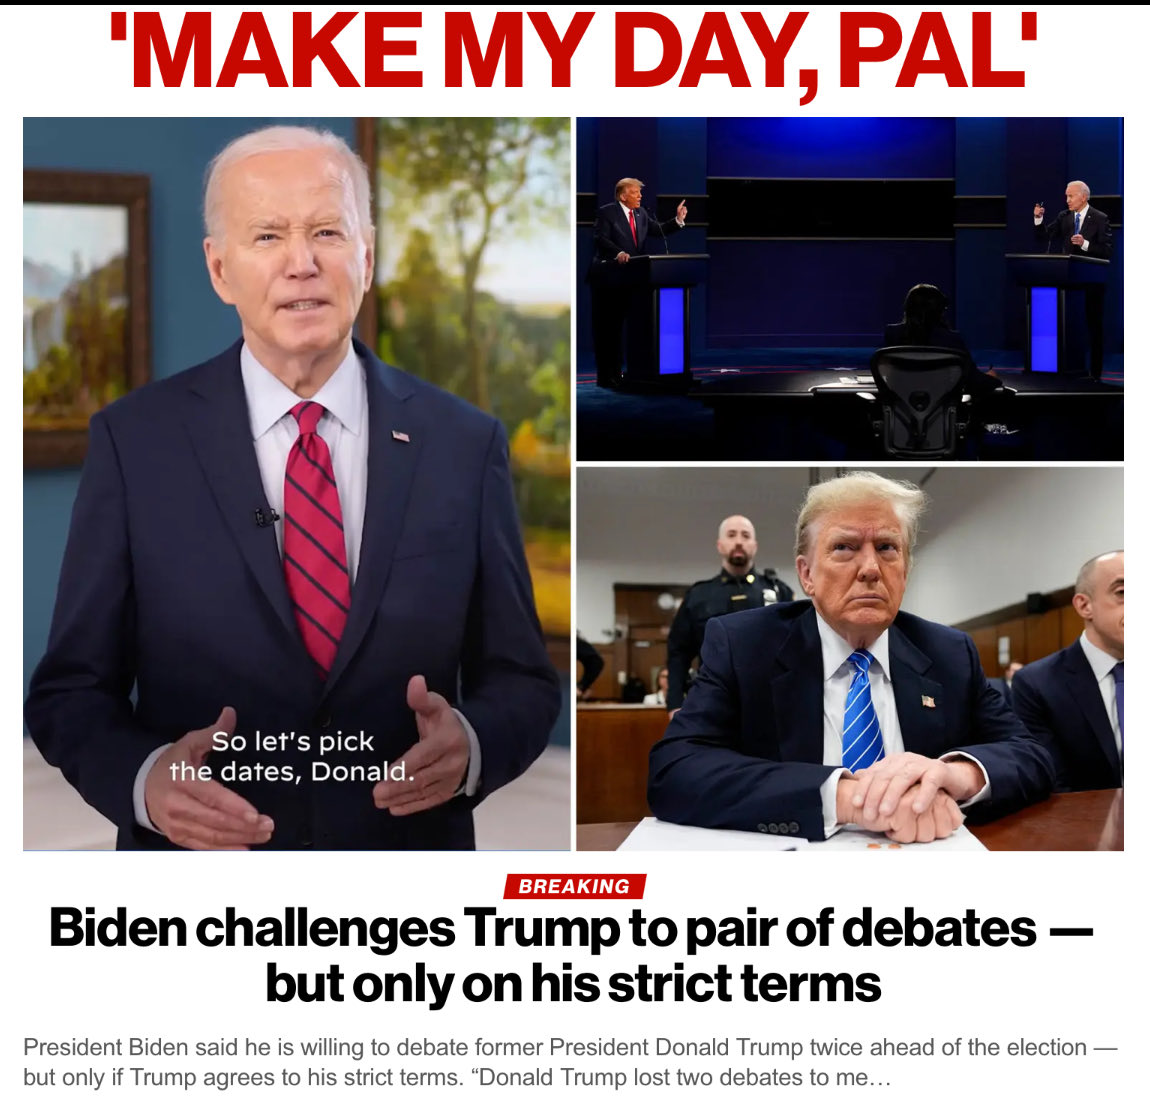 HAVE SOME NUTS JOE AND DEBATE DONALD MANO-A-MANO!! WILL HE ACTUALLY DO IT THOUGH??